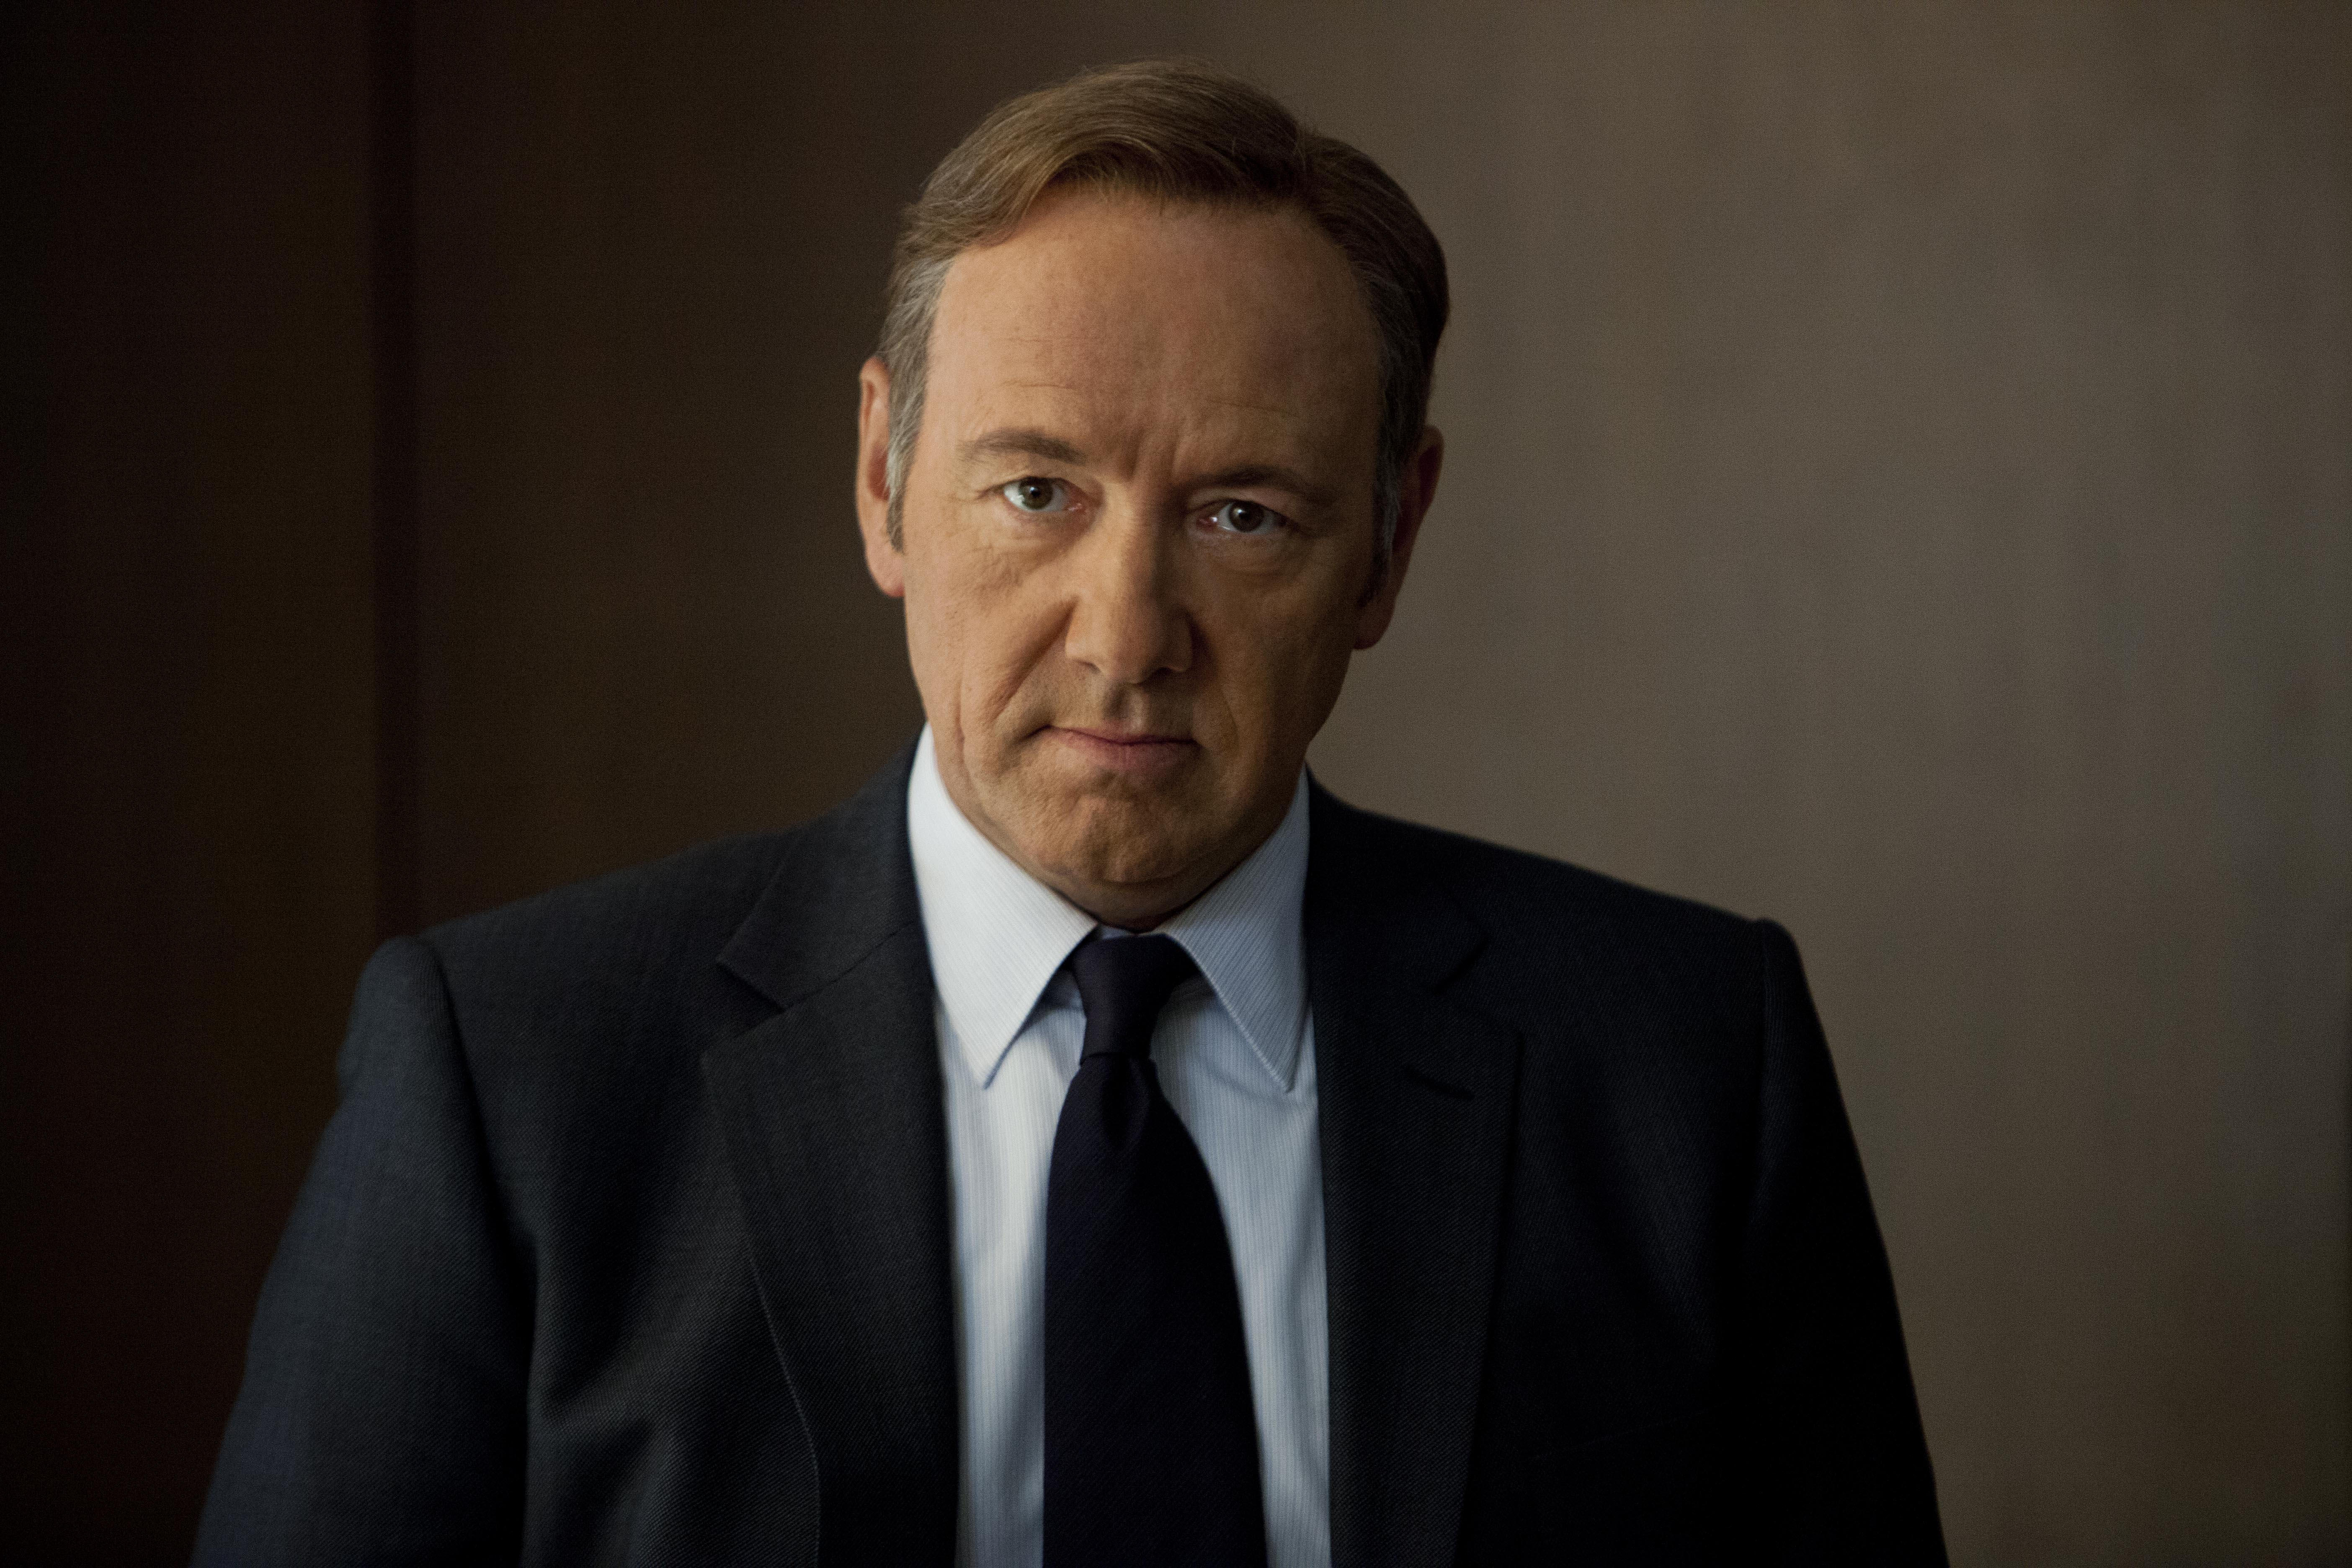 Kevin Spacey signs on for first movie role since winning $40 million lawsuit